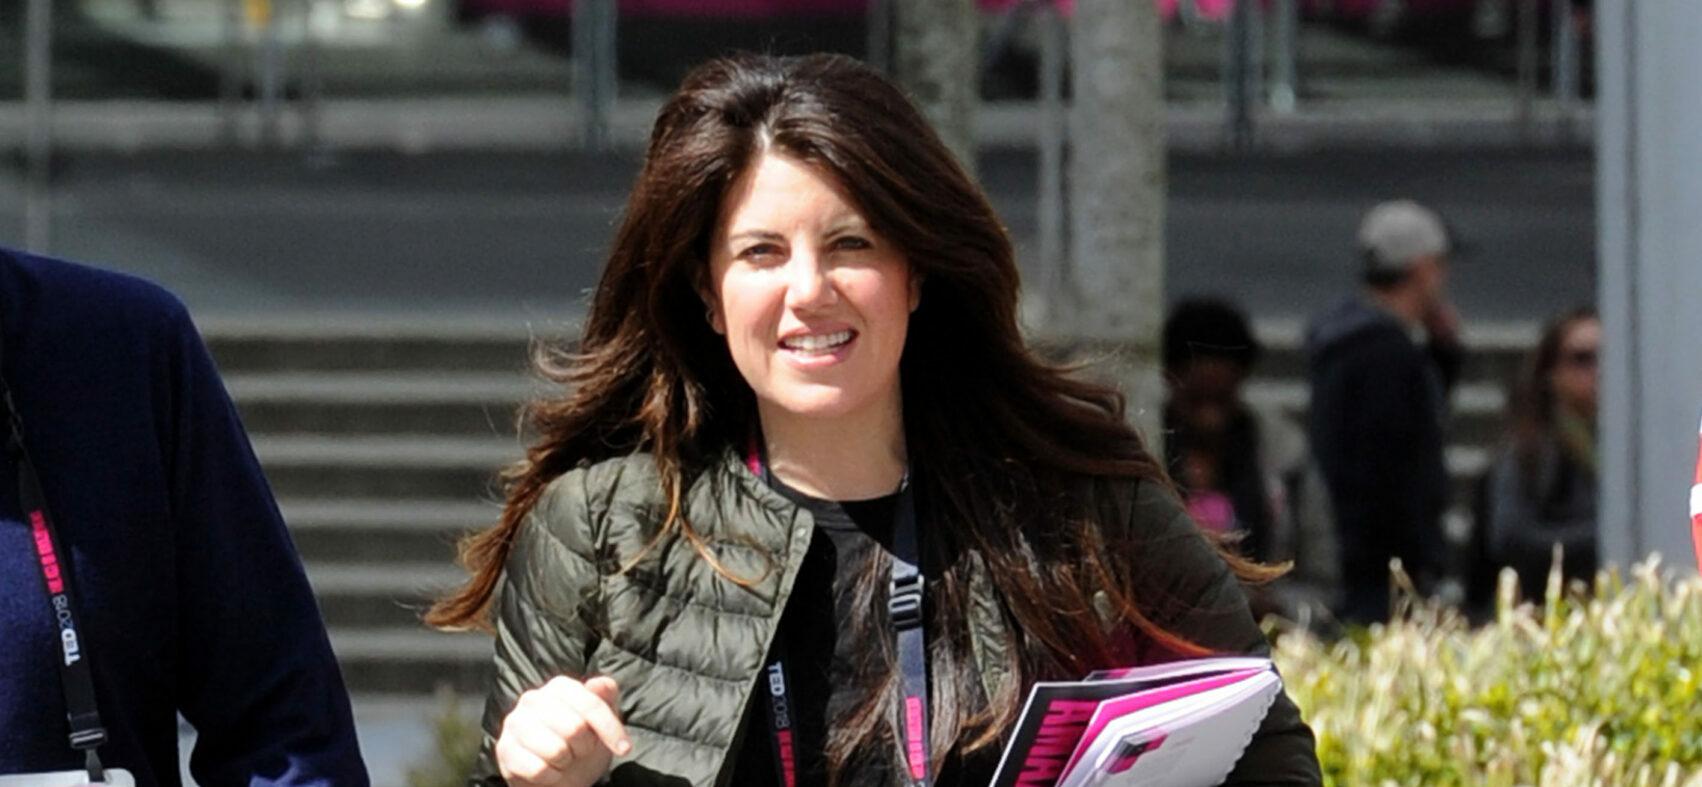 Monica Lewinsky arrives at the TED talks conference in Vancouver Canada